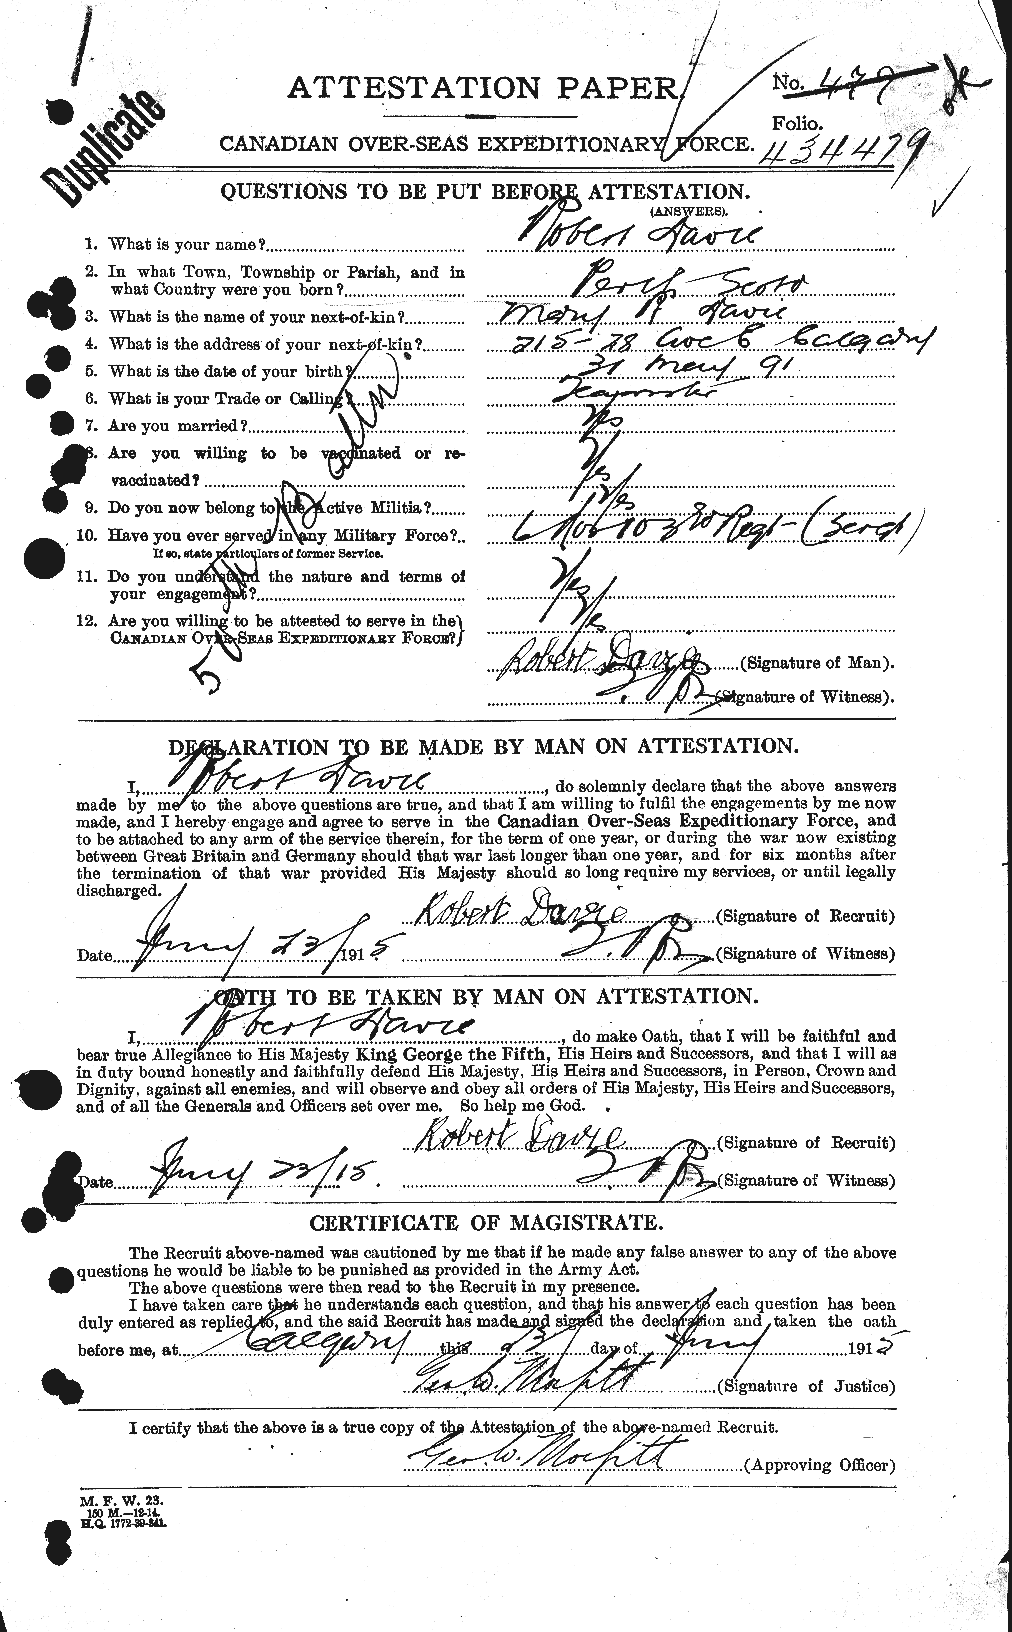 Personnel Records of the First World War - CEF 278843a